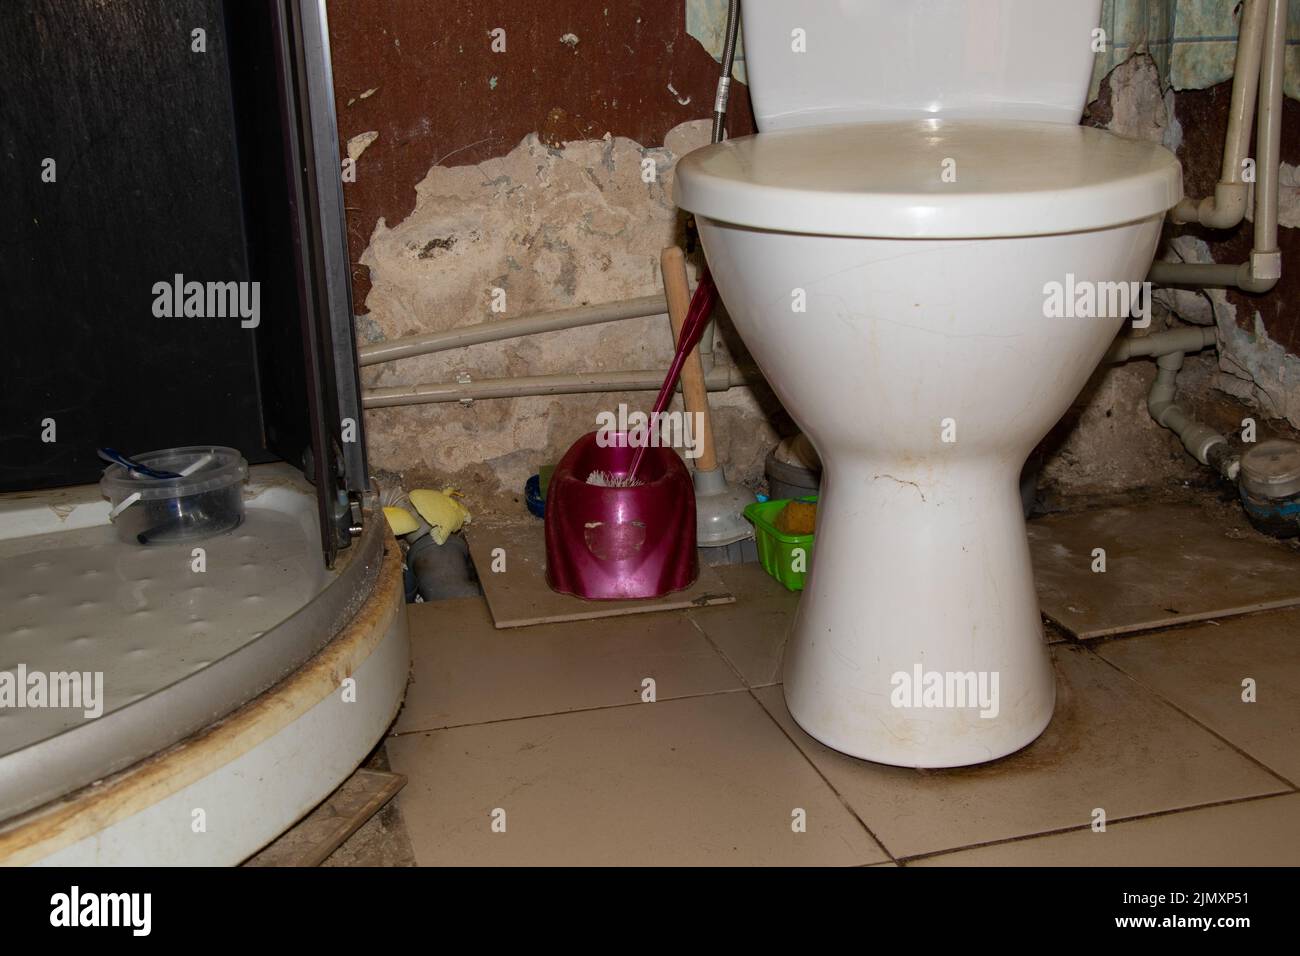 https://c8.alamy.com/comp/2JMXP51/old-dirty-bathroom-and-toilet-without-repair-in-the-apartment-bathroom-and-toilet-without-repair-vigilance-2JMXP51.jpg